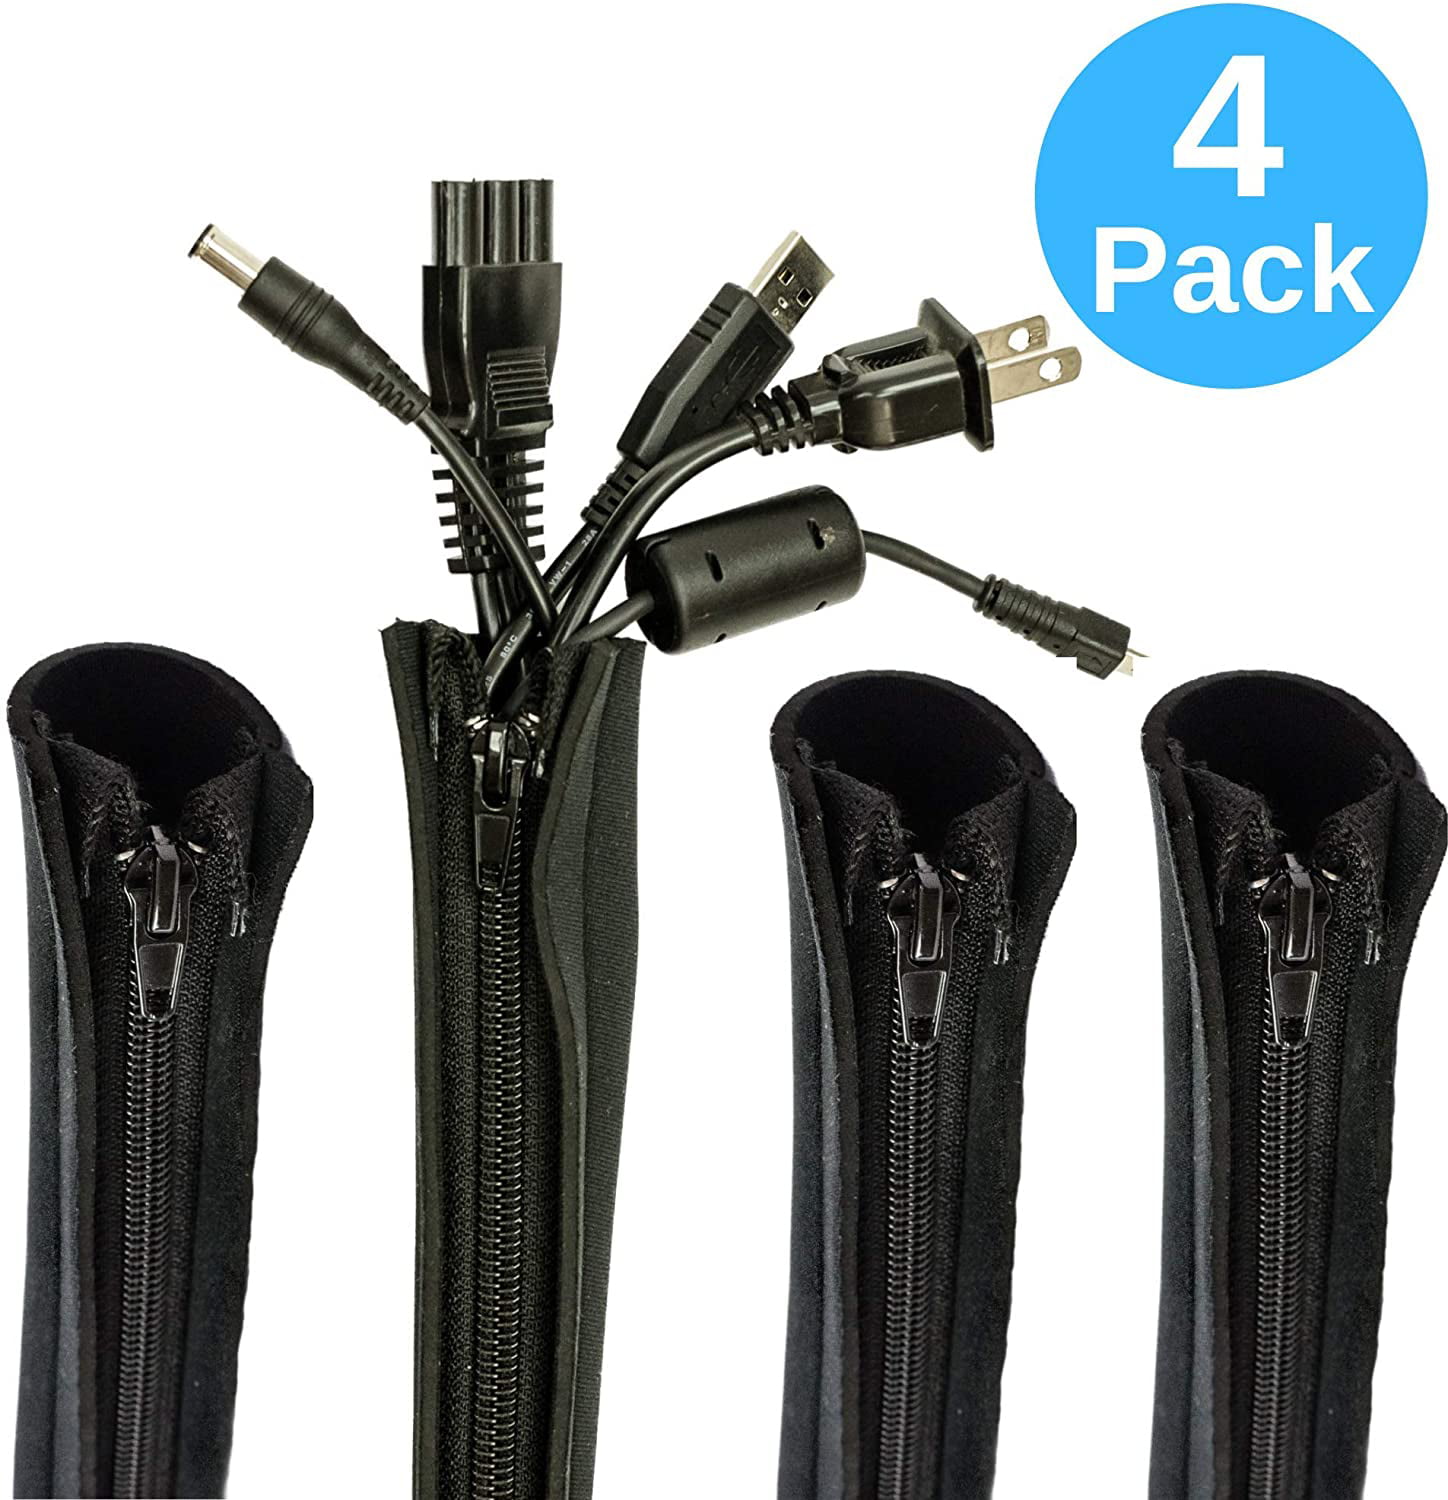 19.5" Expandable Computer Cord Organizer System Cable Management Sleeve II 